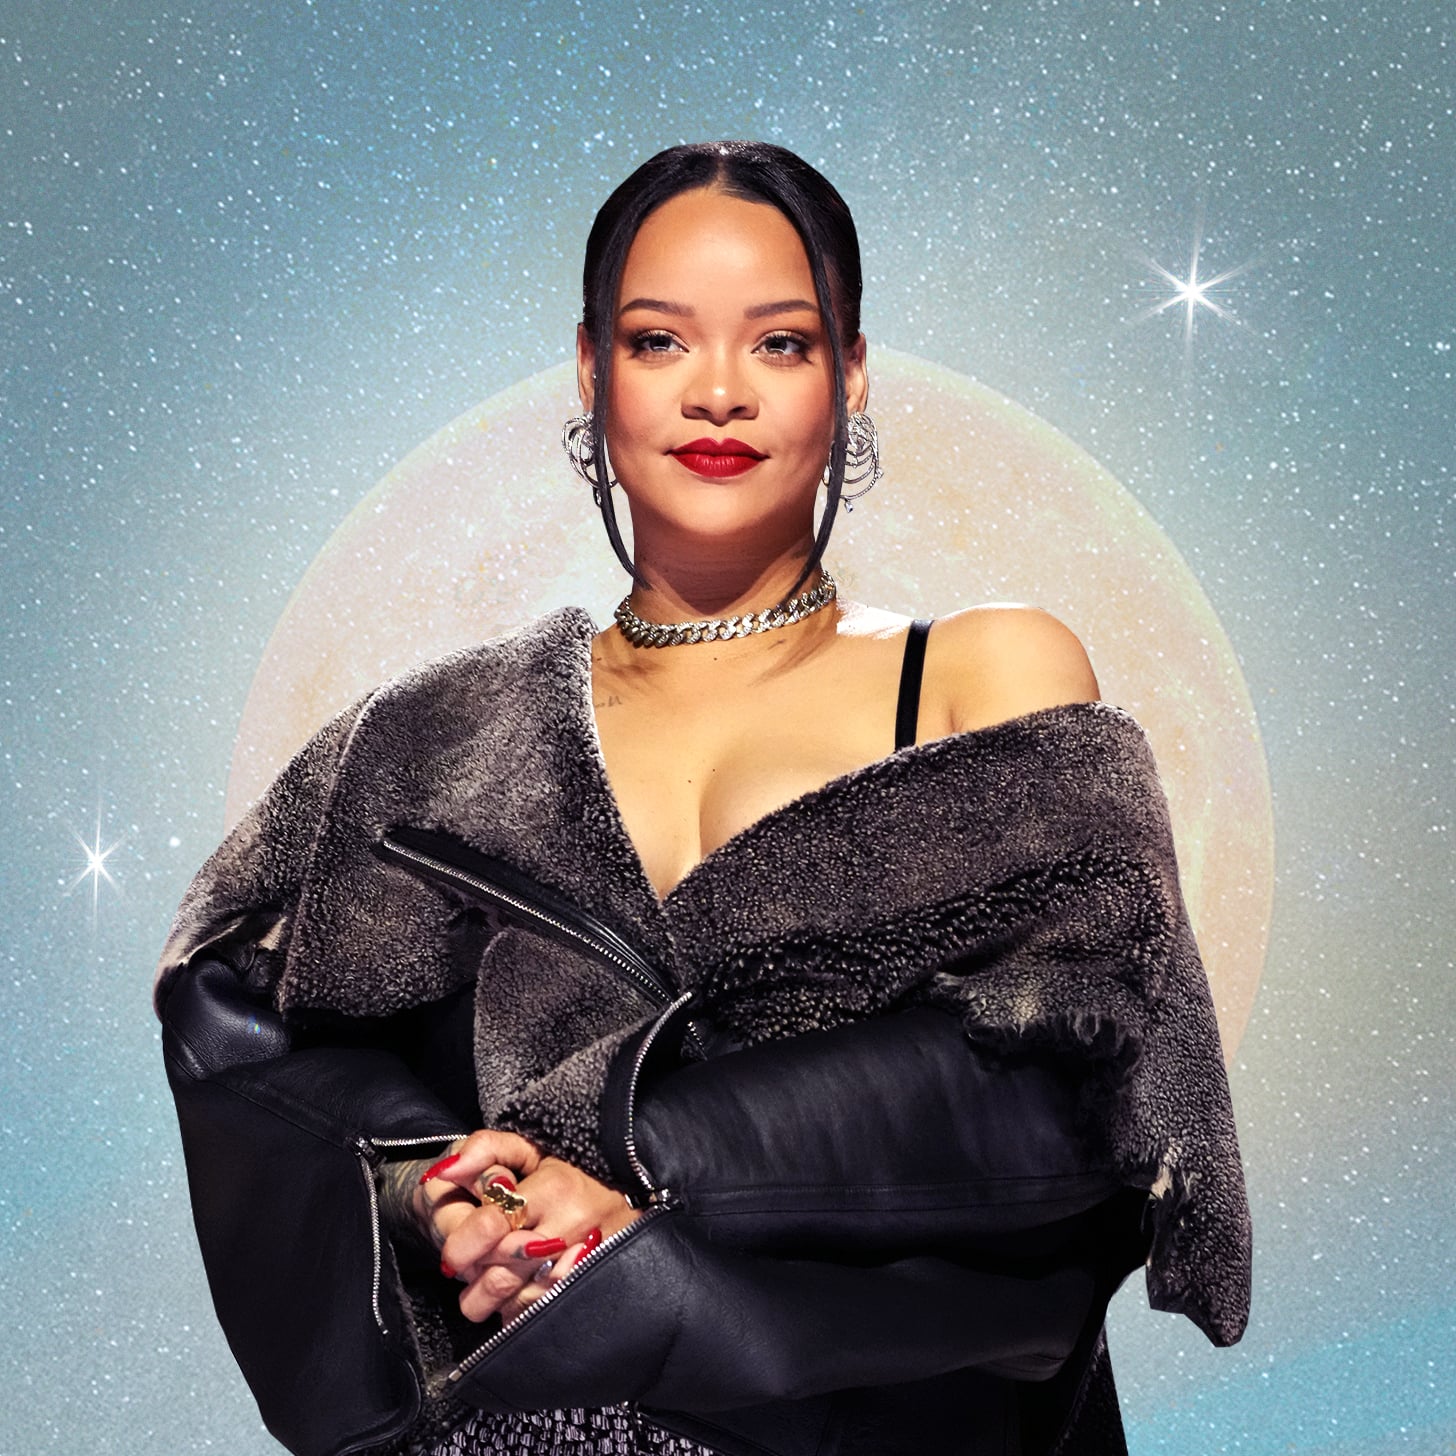 What We Can Learn From Rihanna's Birth Chart